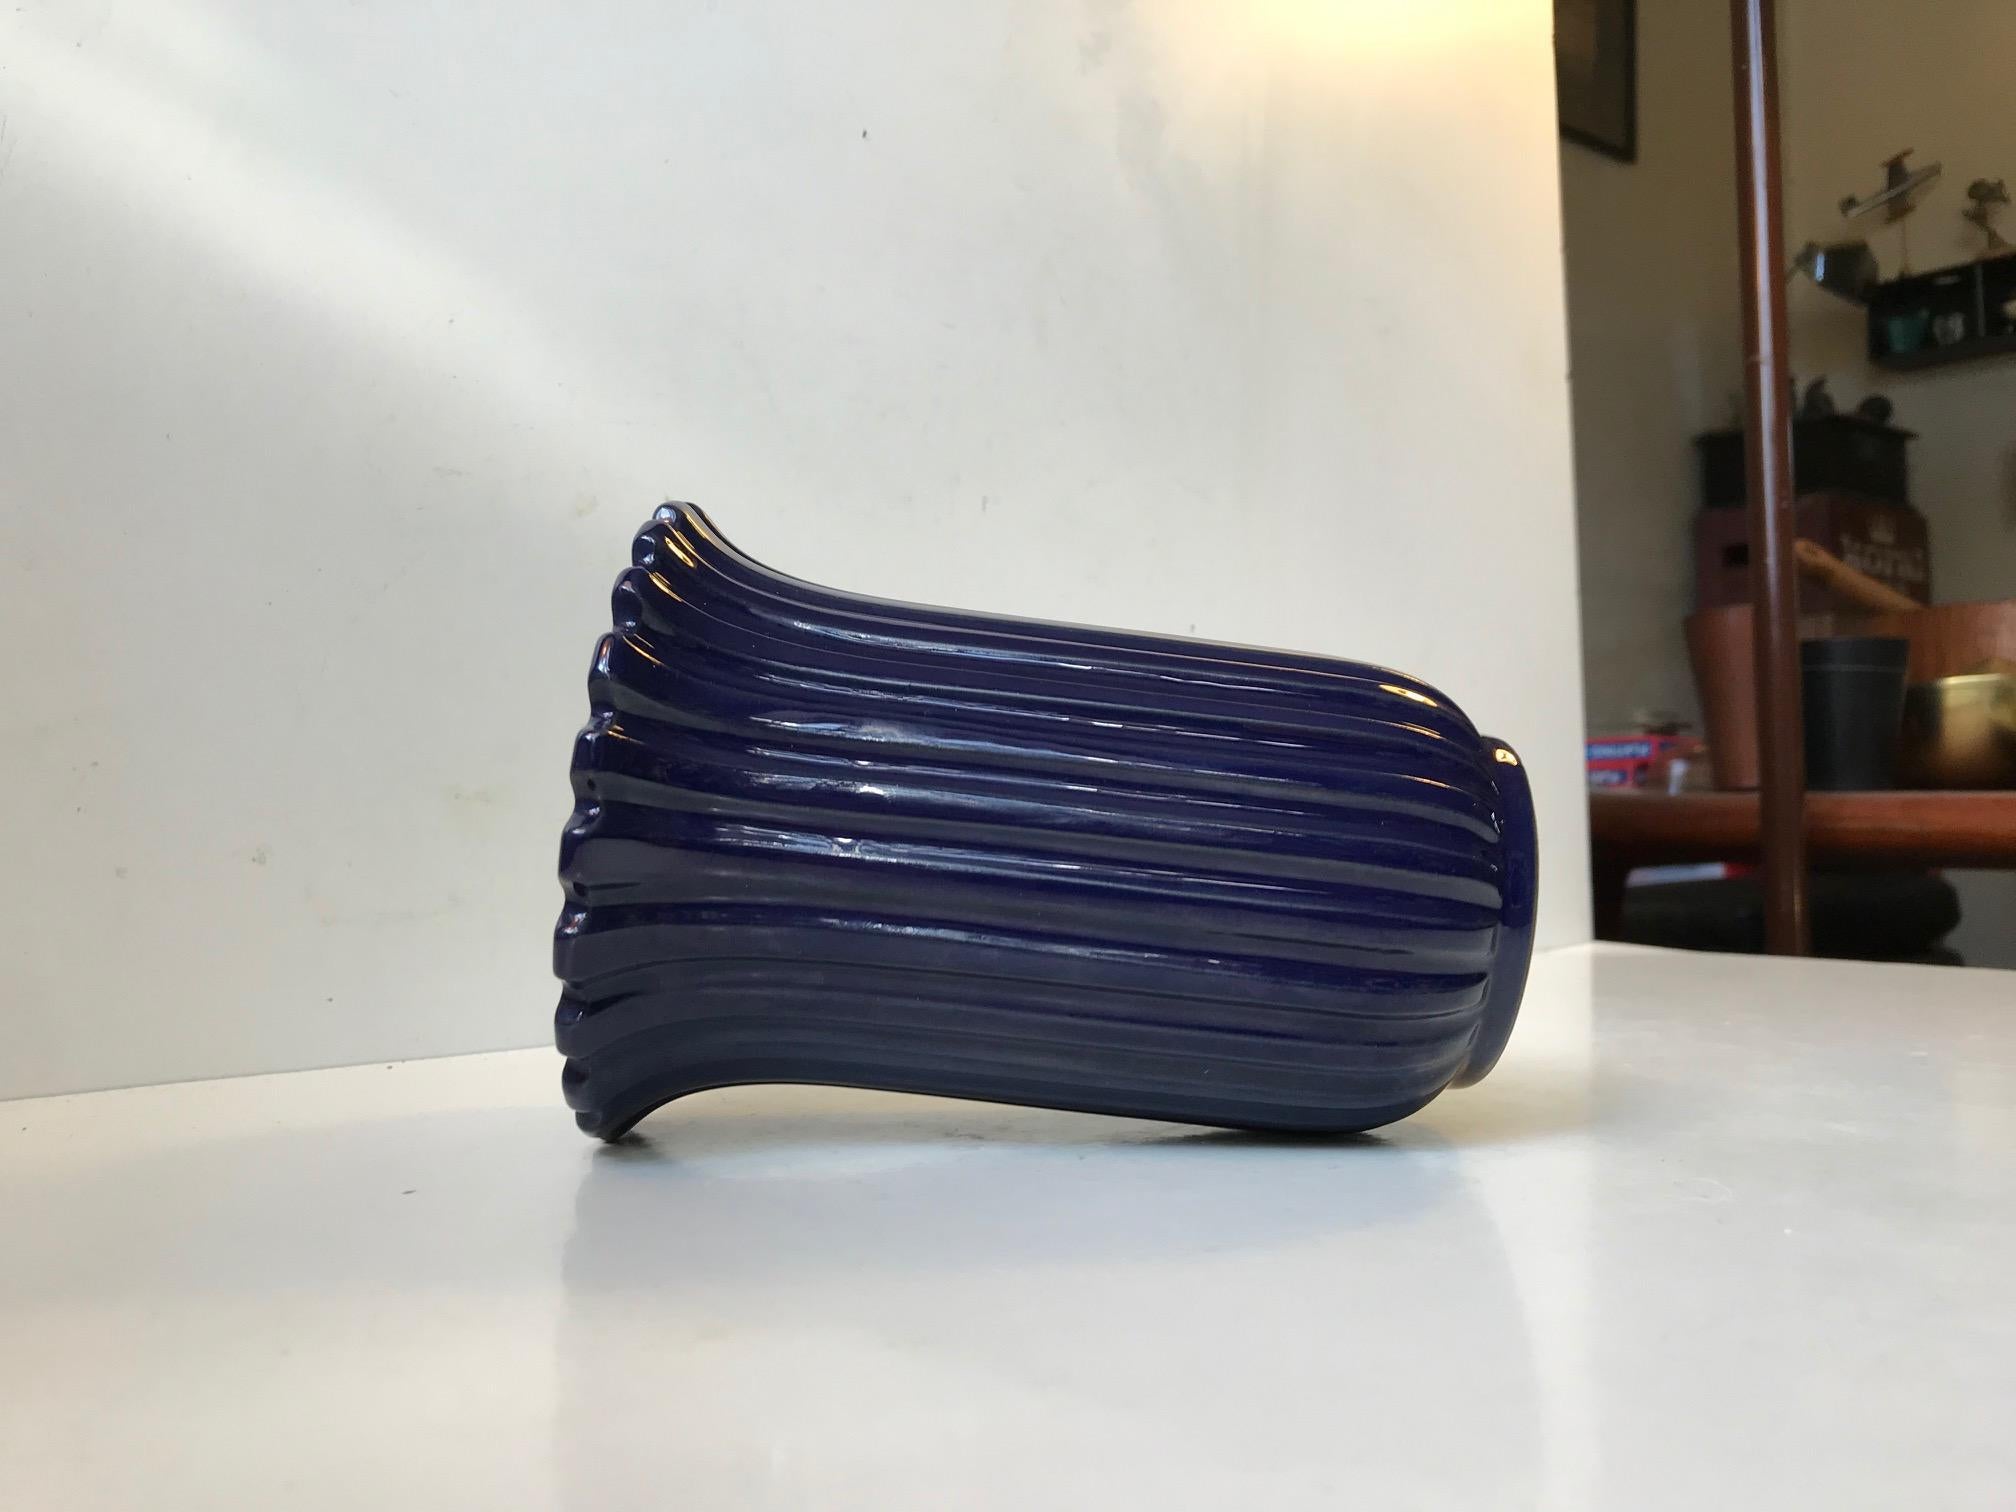 Art deco revival ceramic vase from the 1970s. Fluted fully glazed corpus in dark blue. This color is by far the rarest. Its designed by Eslau in Denmark and manufactured at their own Studio during the 1970s. This style has clear reference points to